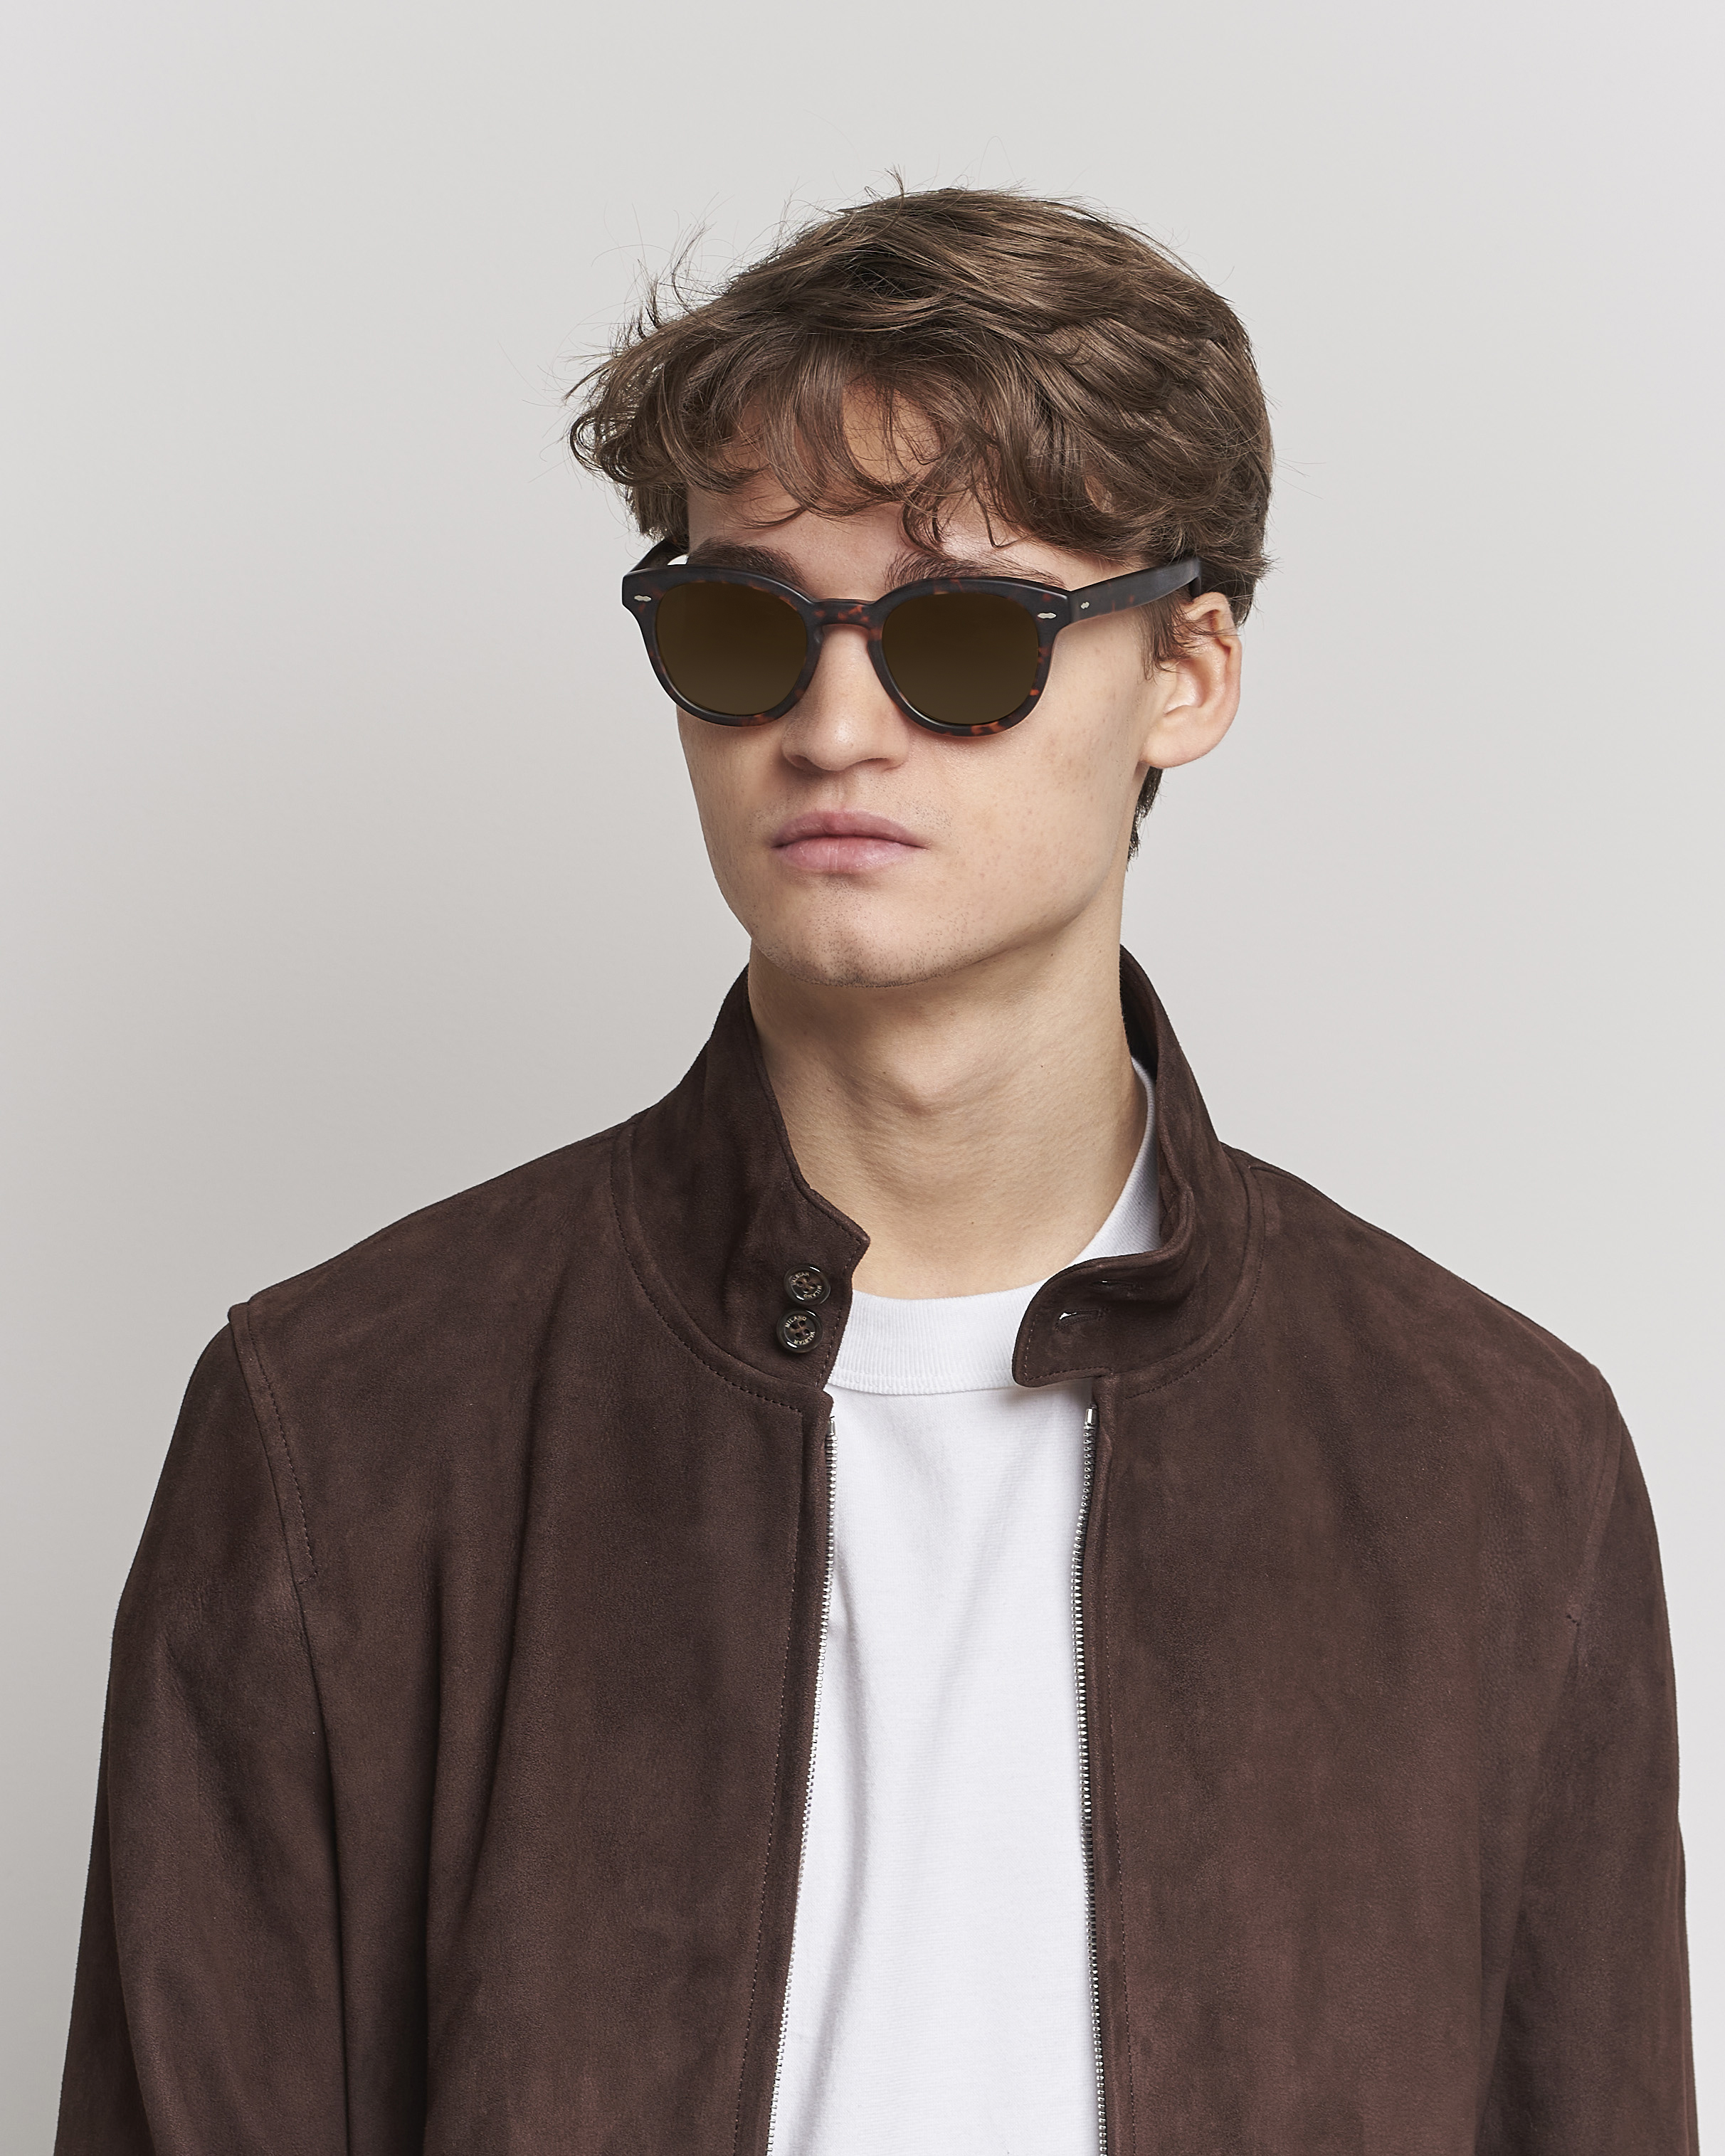 Herr | Oliver Peoples | Oliver Peoples | Cary Grant Sunglasses Semi Matte Tortoise